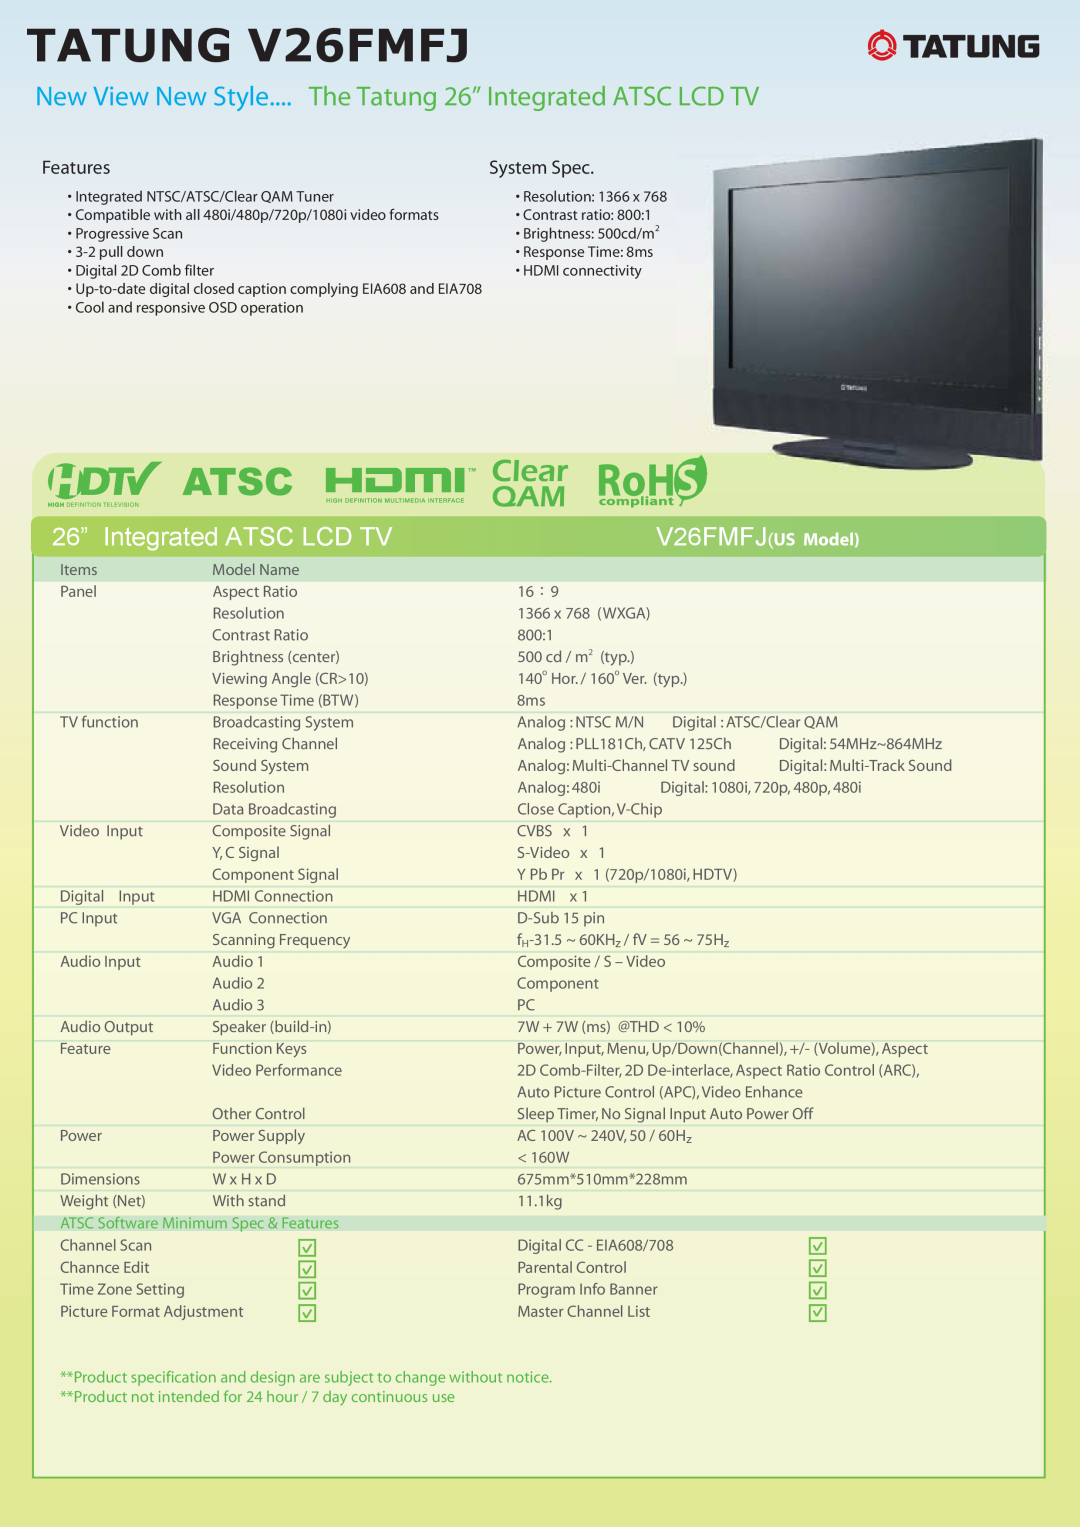 Tatung manual TATUNG V26FMFJ, New View New Style.... The Tatung 26” Integrated ATSC LCD TV, Features, System Spec 